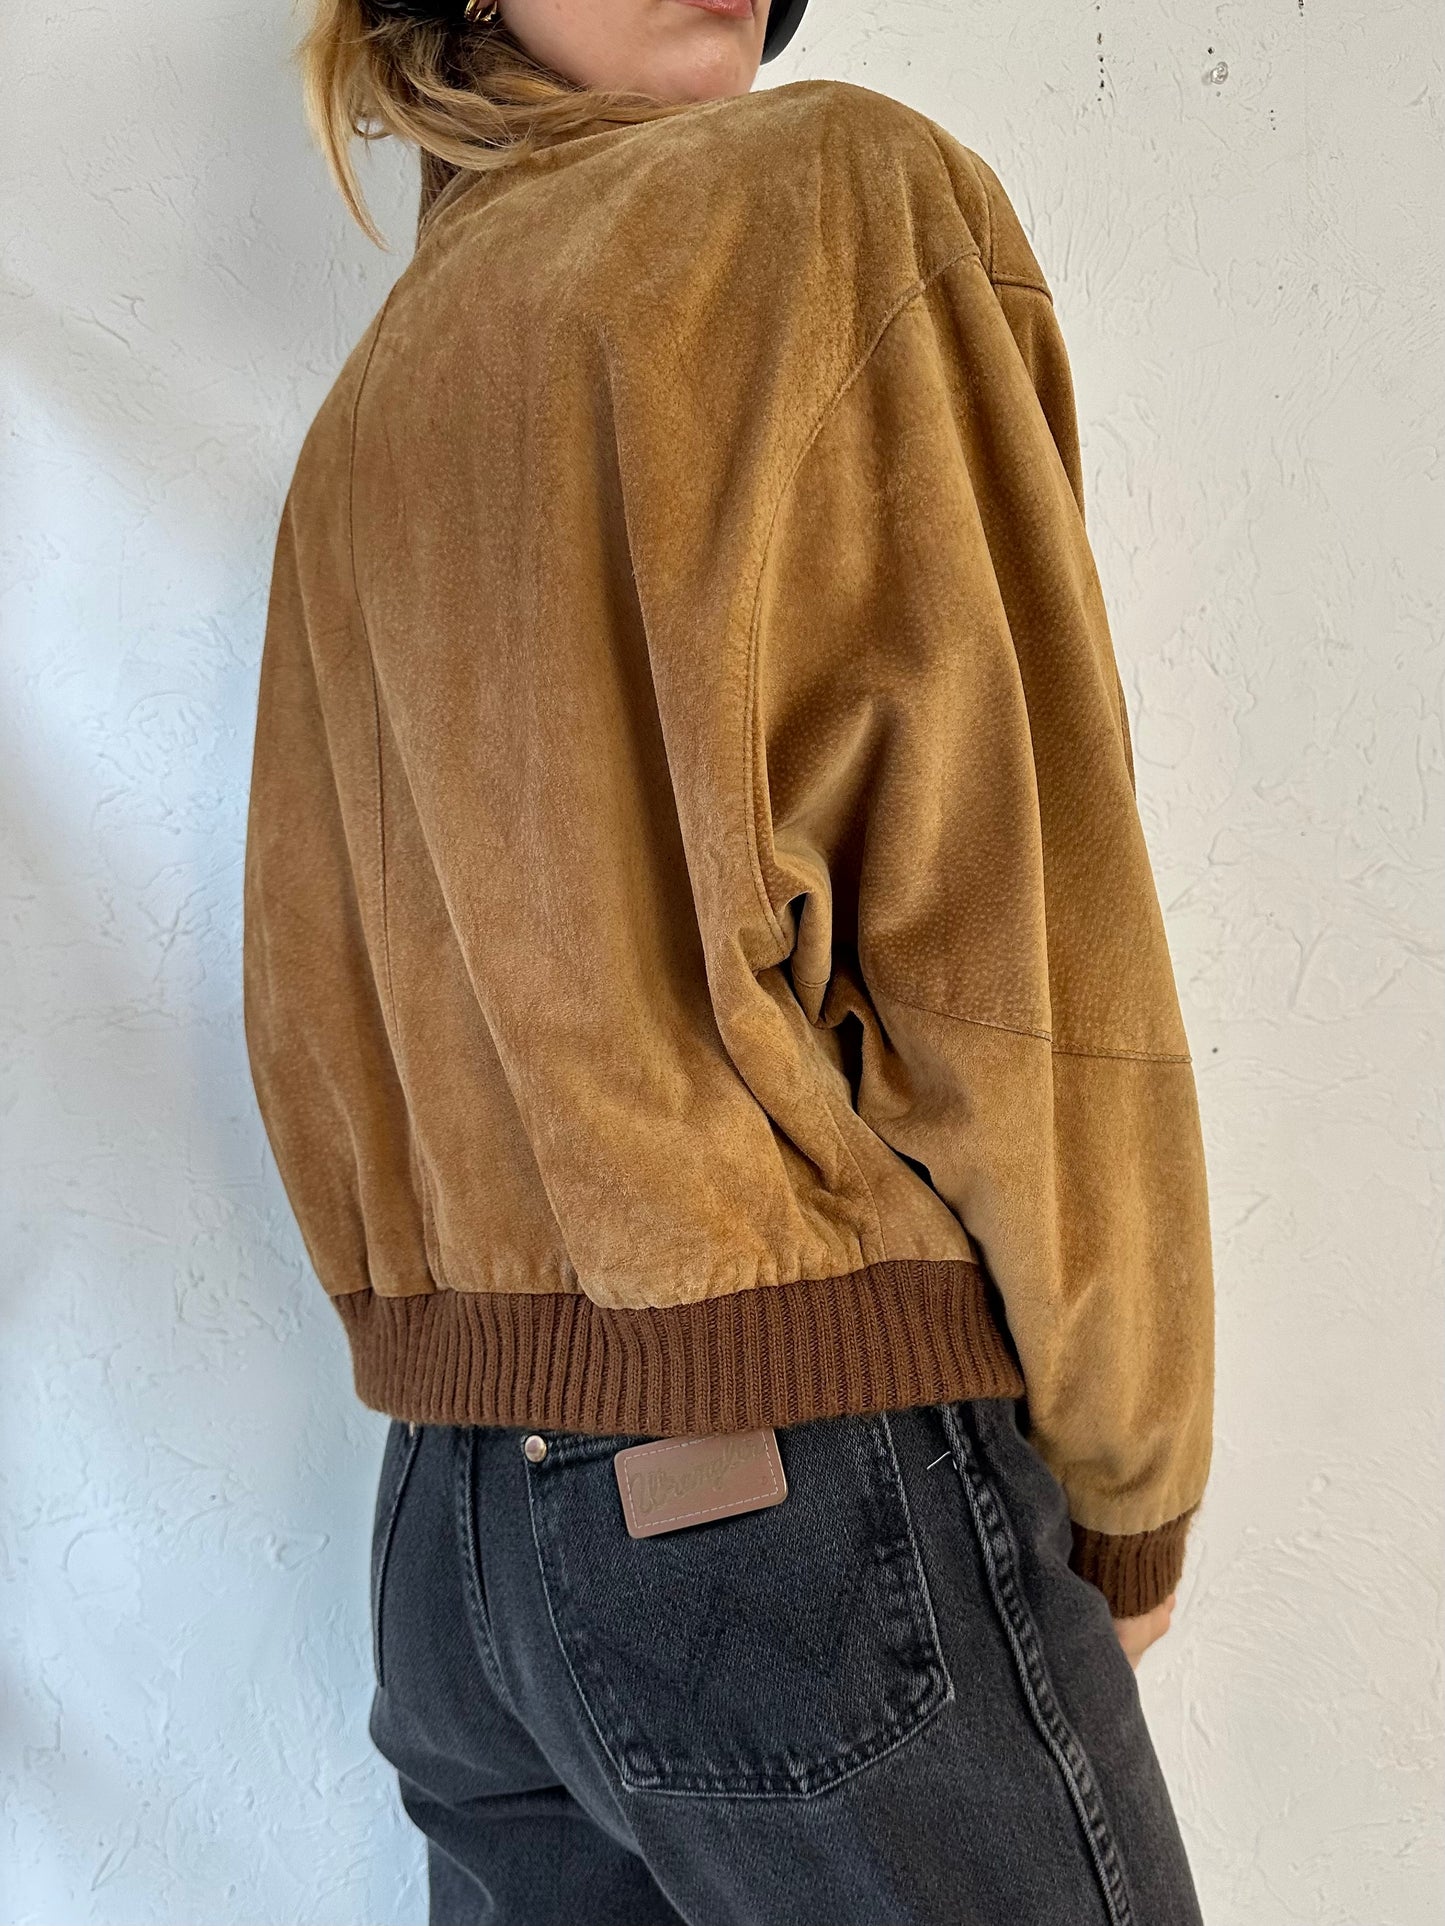 90s 'West Bay' Suede Leather Bomber Jacket / Large